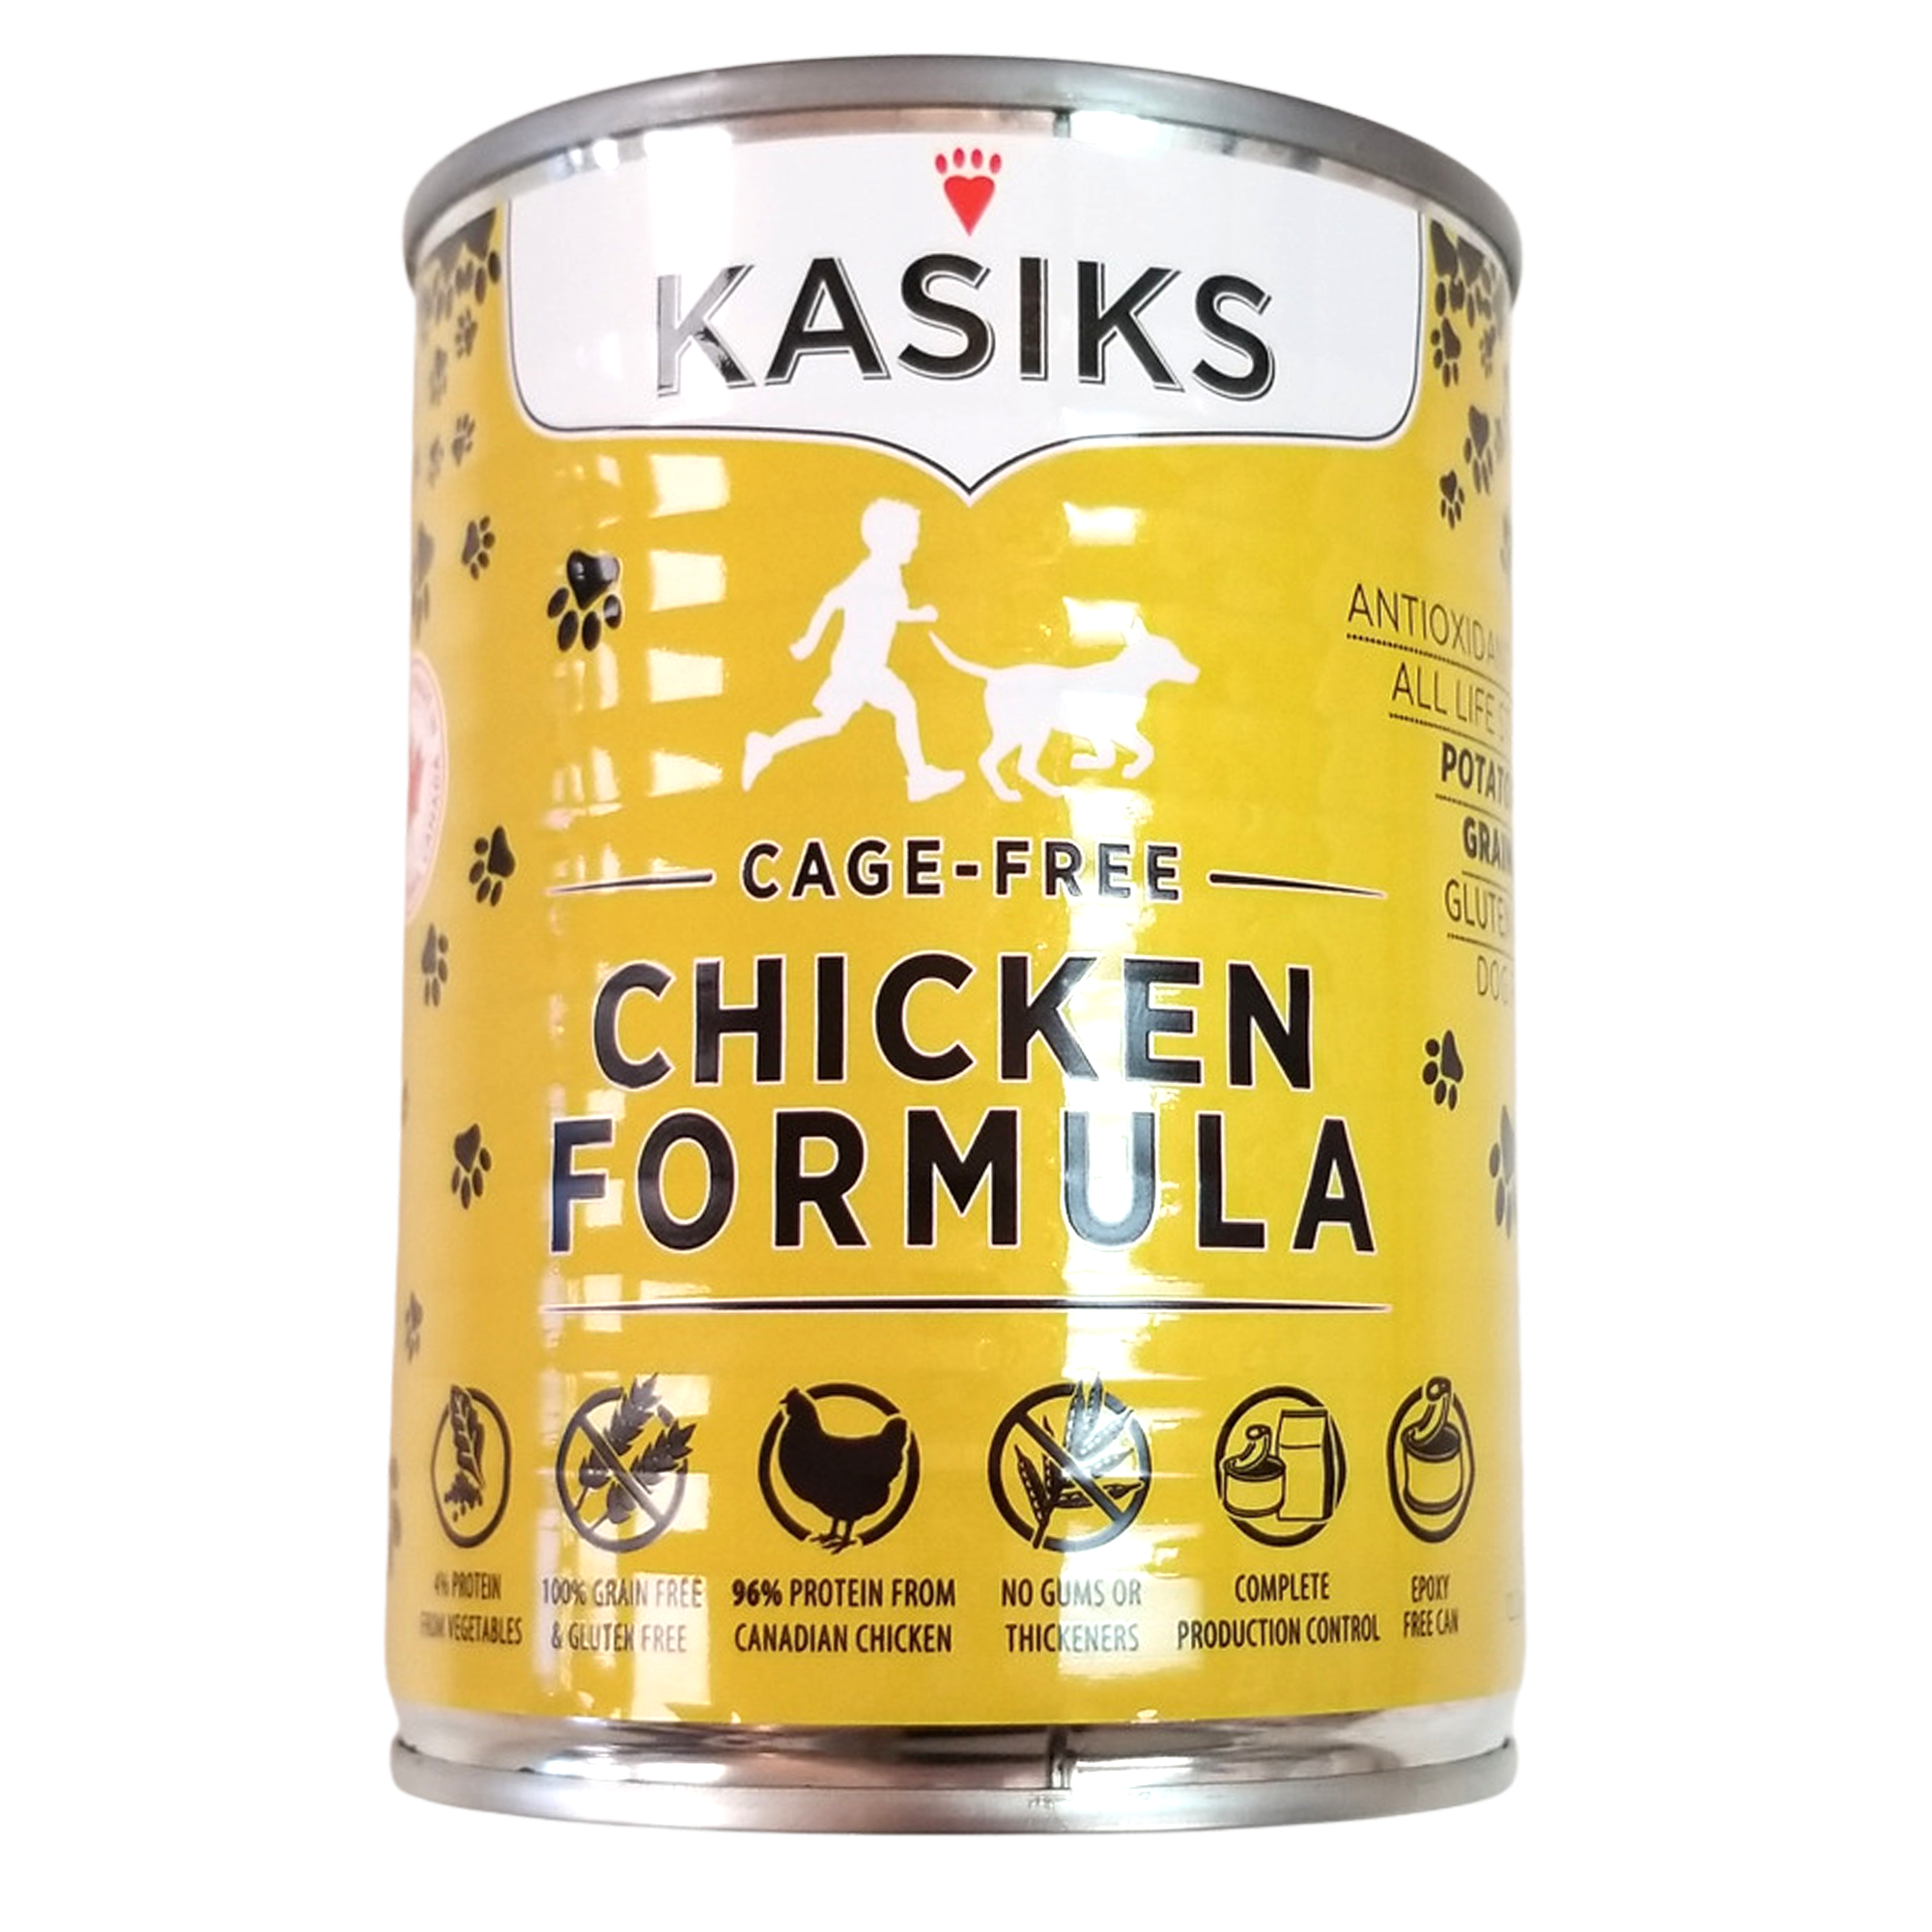 Kasiks Canned Dog Food, All Life Stages, Grain-Free, Cage Free Chicken Formula, 12.2oz